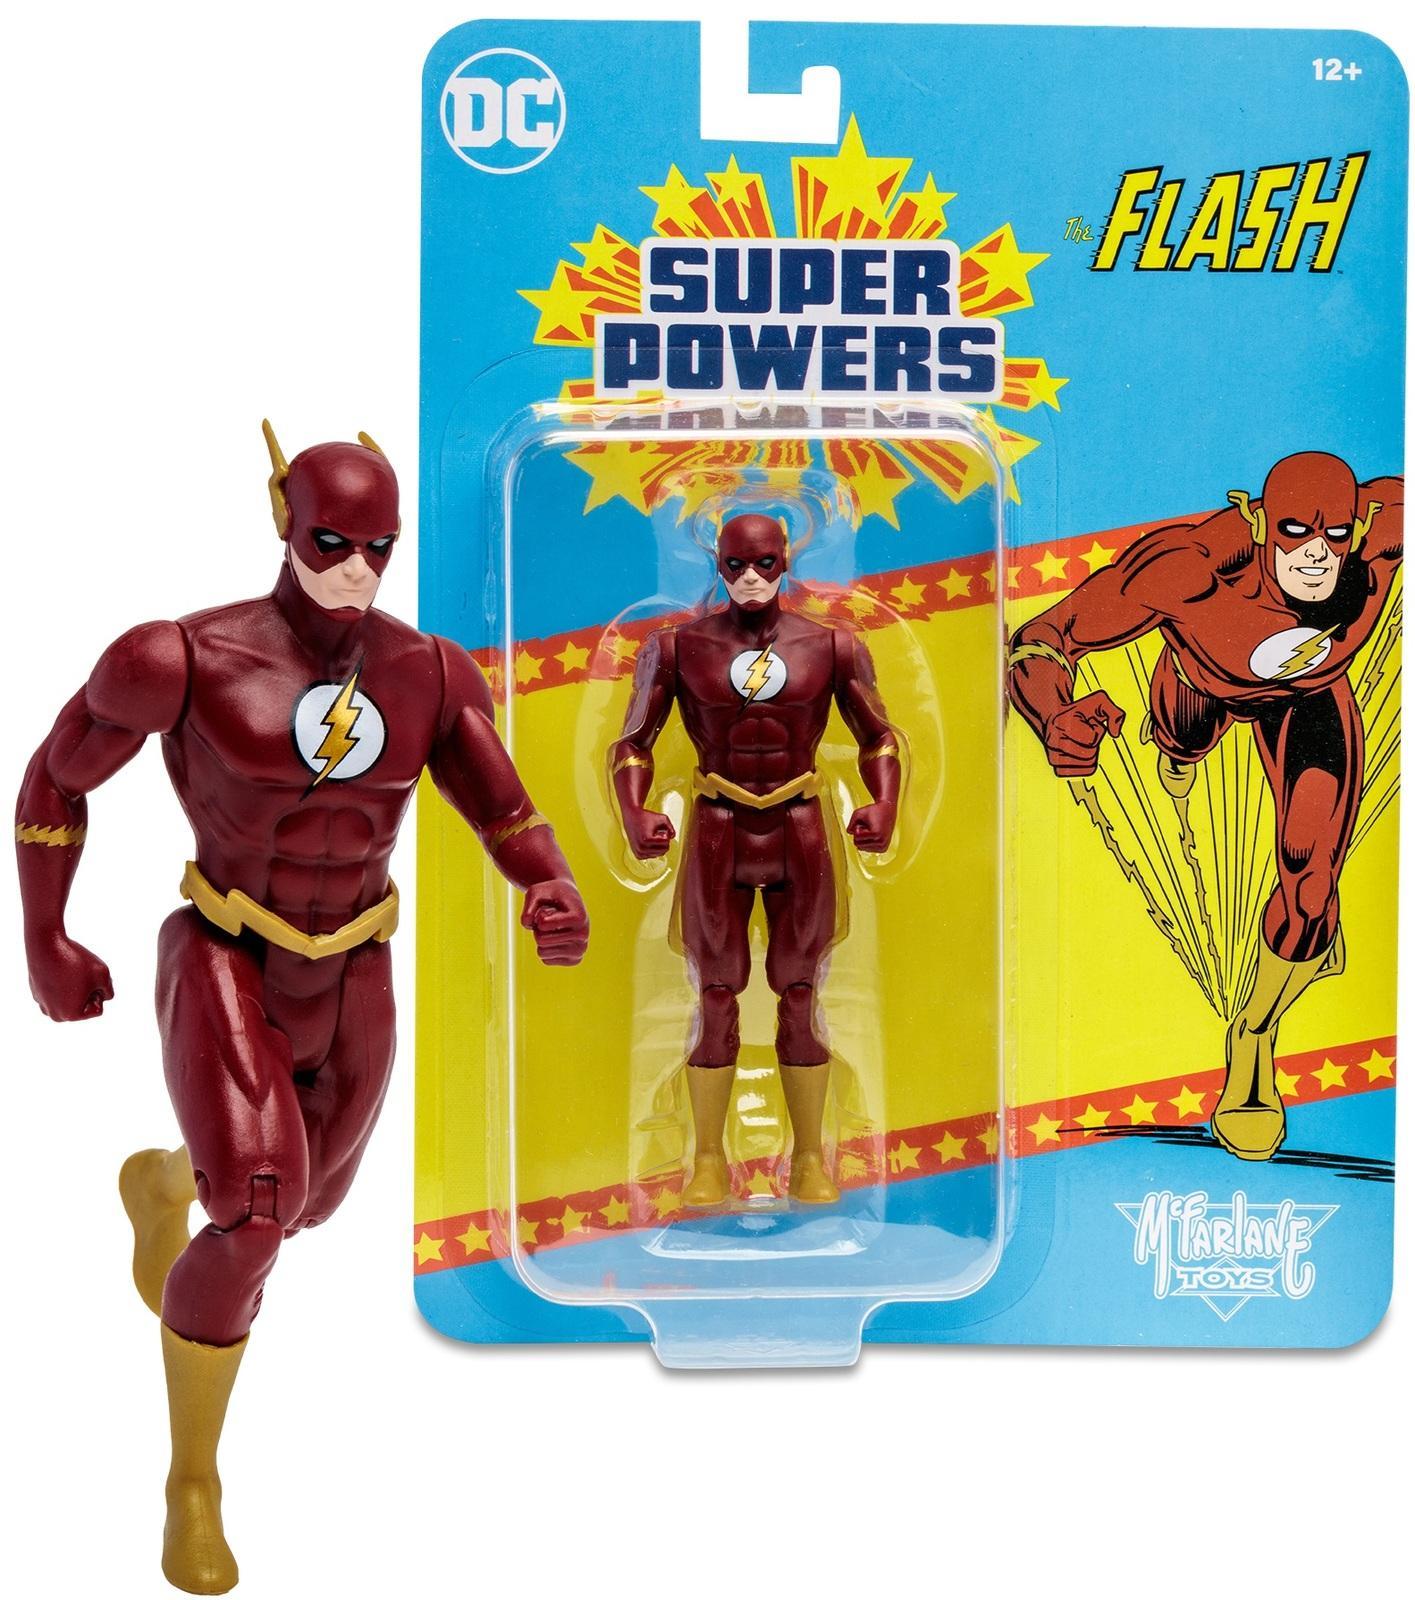 DC Super Powers: The Flash (Opposites Attract) - 5" Action Figure